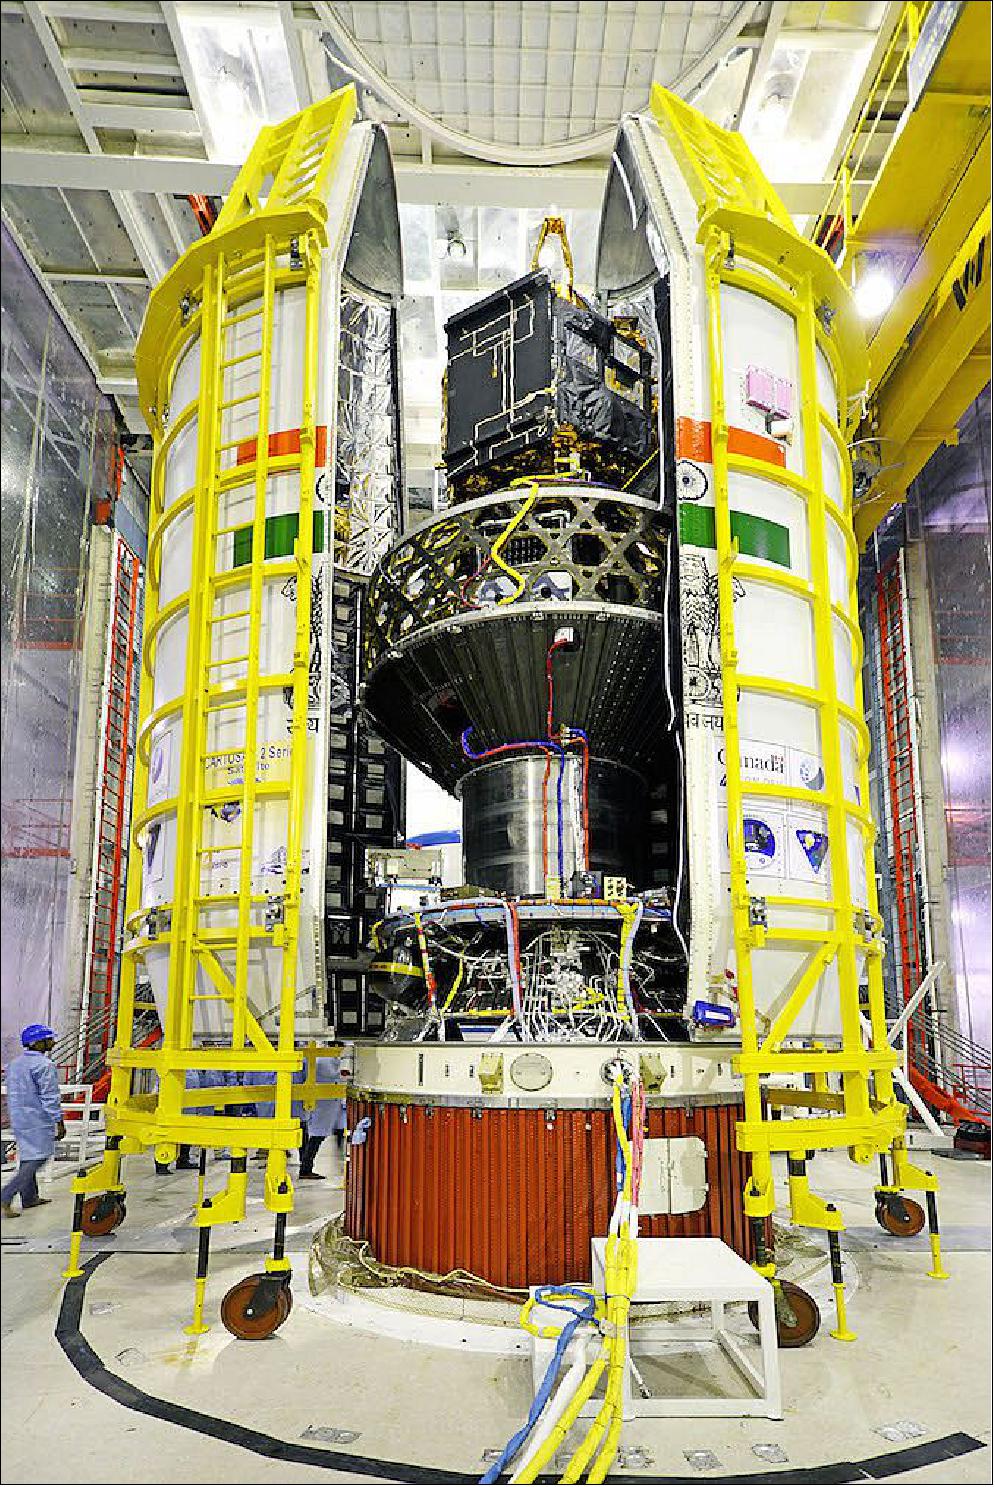 Figure 6: The 20 satellites, with the primary payload CartoSat-2C on top) are packaged inside the PSLV’s payload fairing. The number marks the most satellites ever launched by India on a single flight (image credit: ISRO)